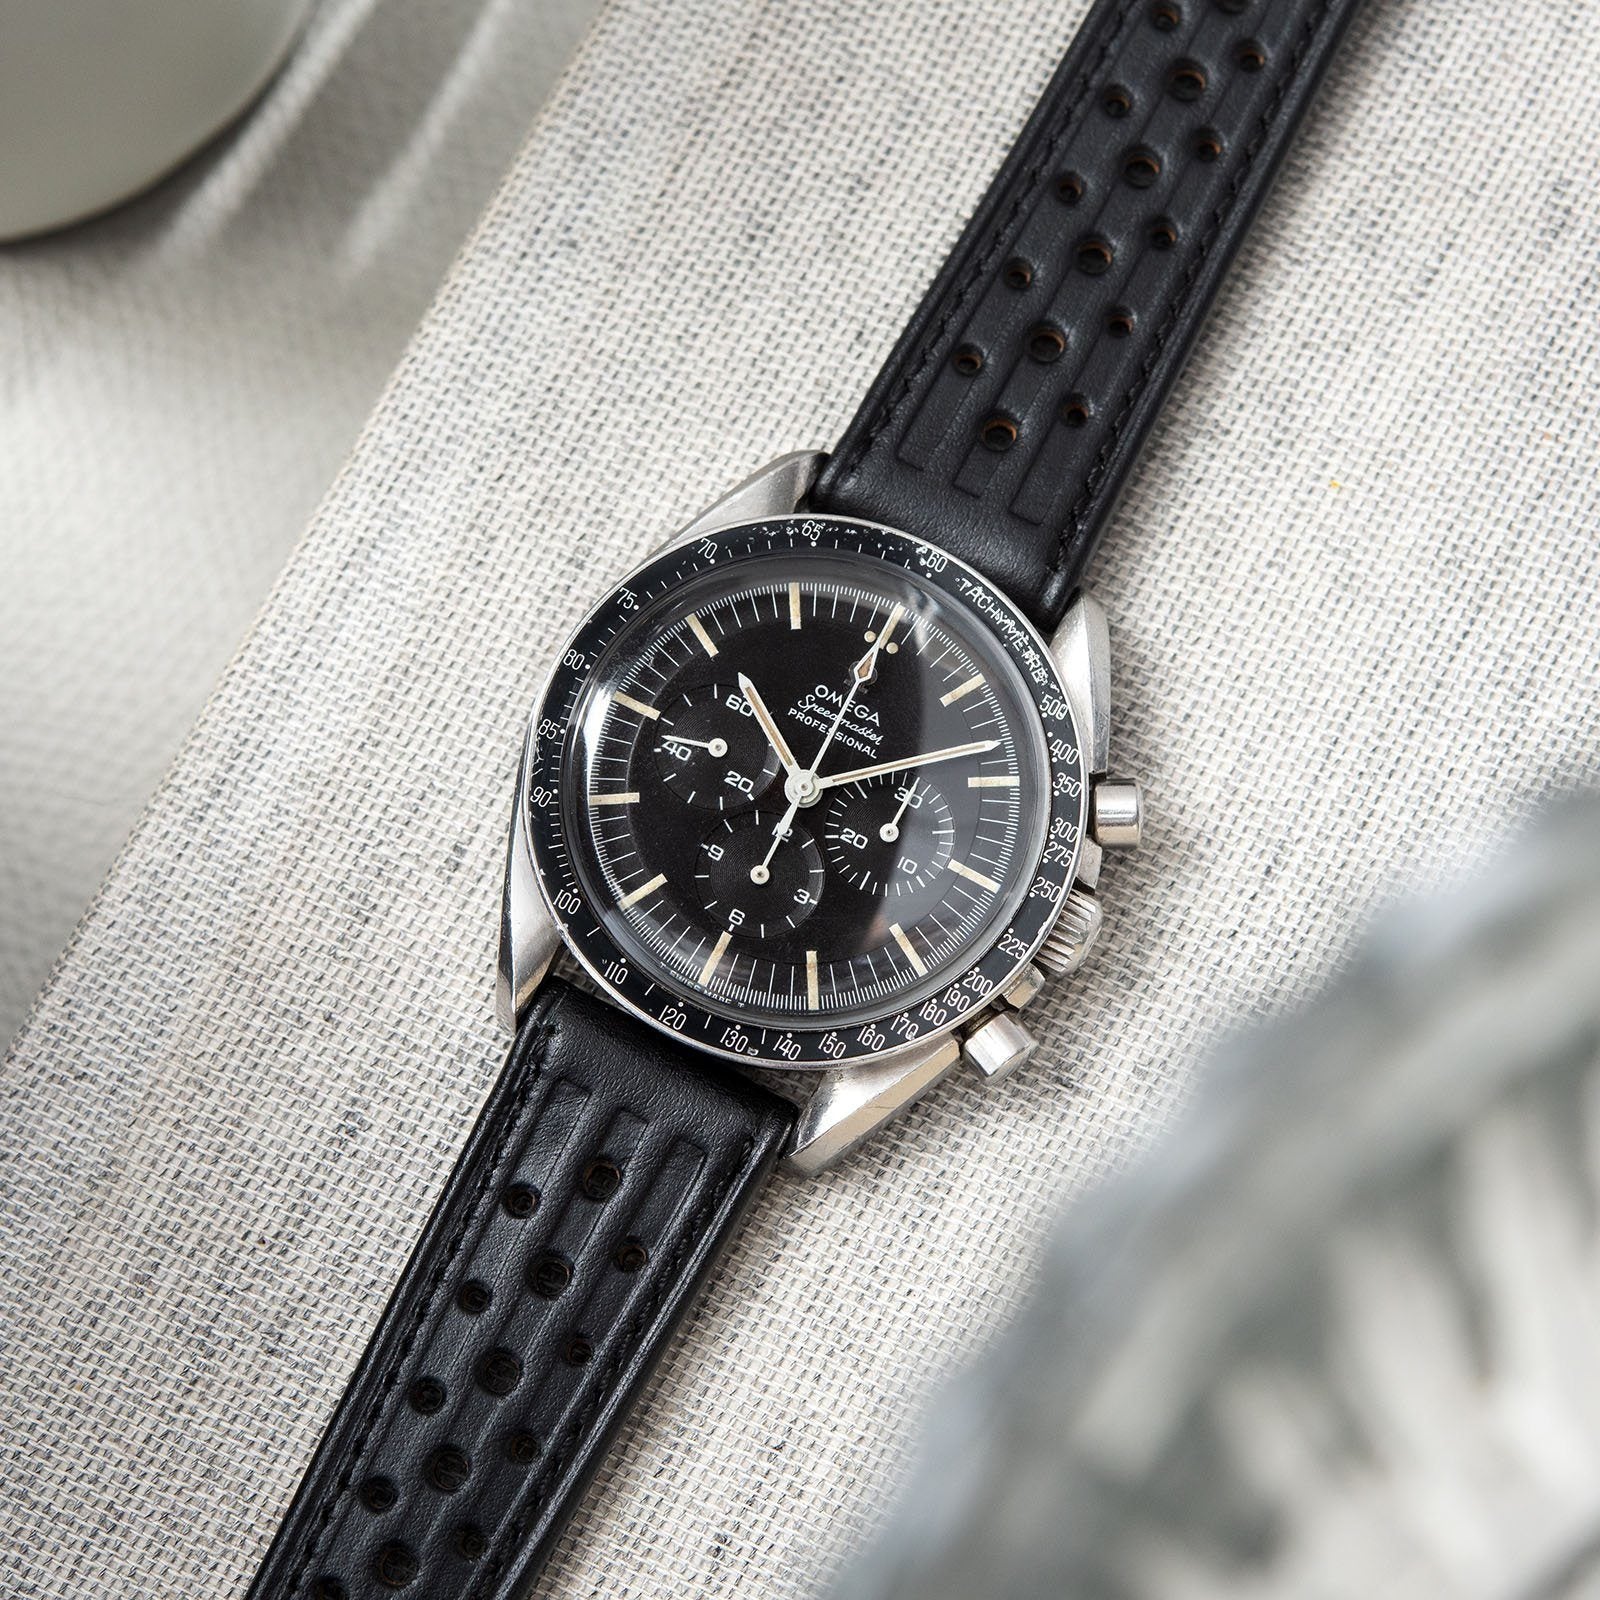 B&S Racing Black Speedy Leather Watch Strap on an Omega Seamaster